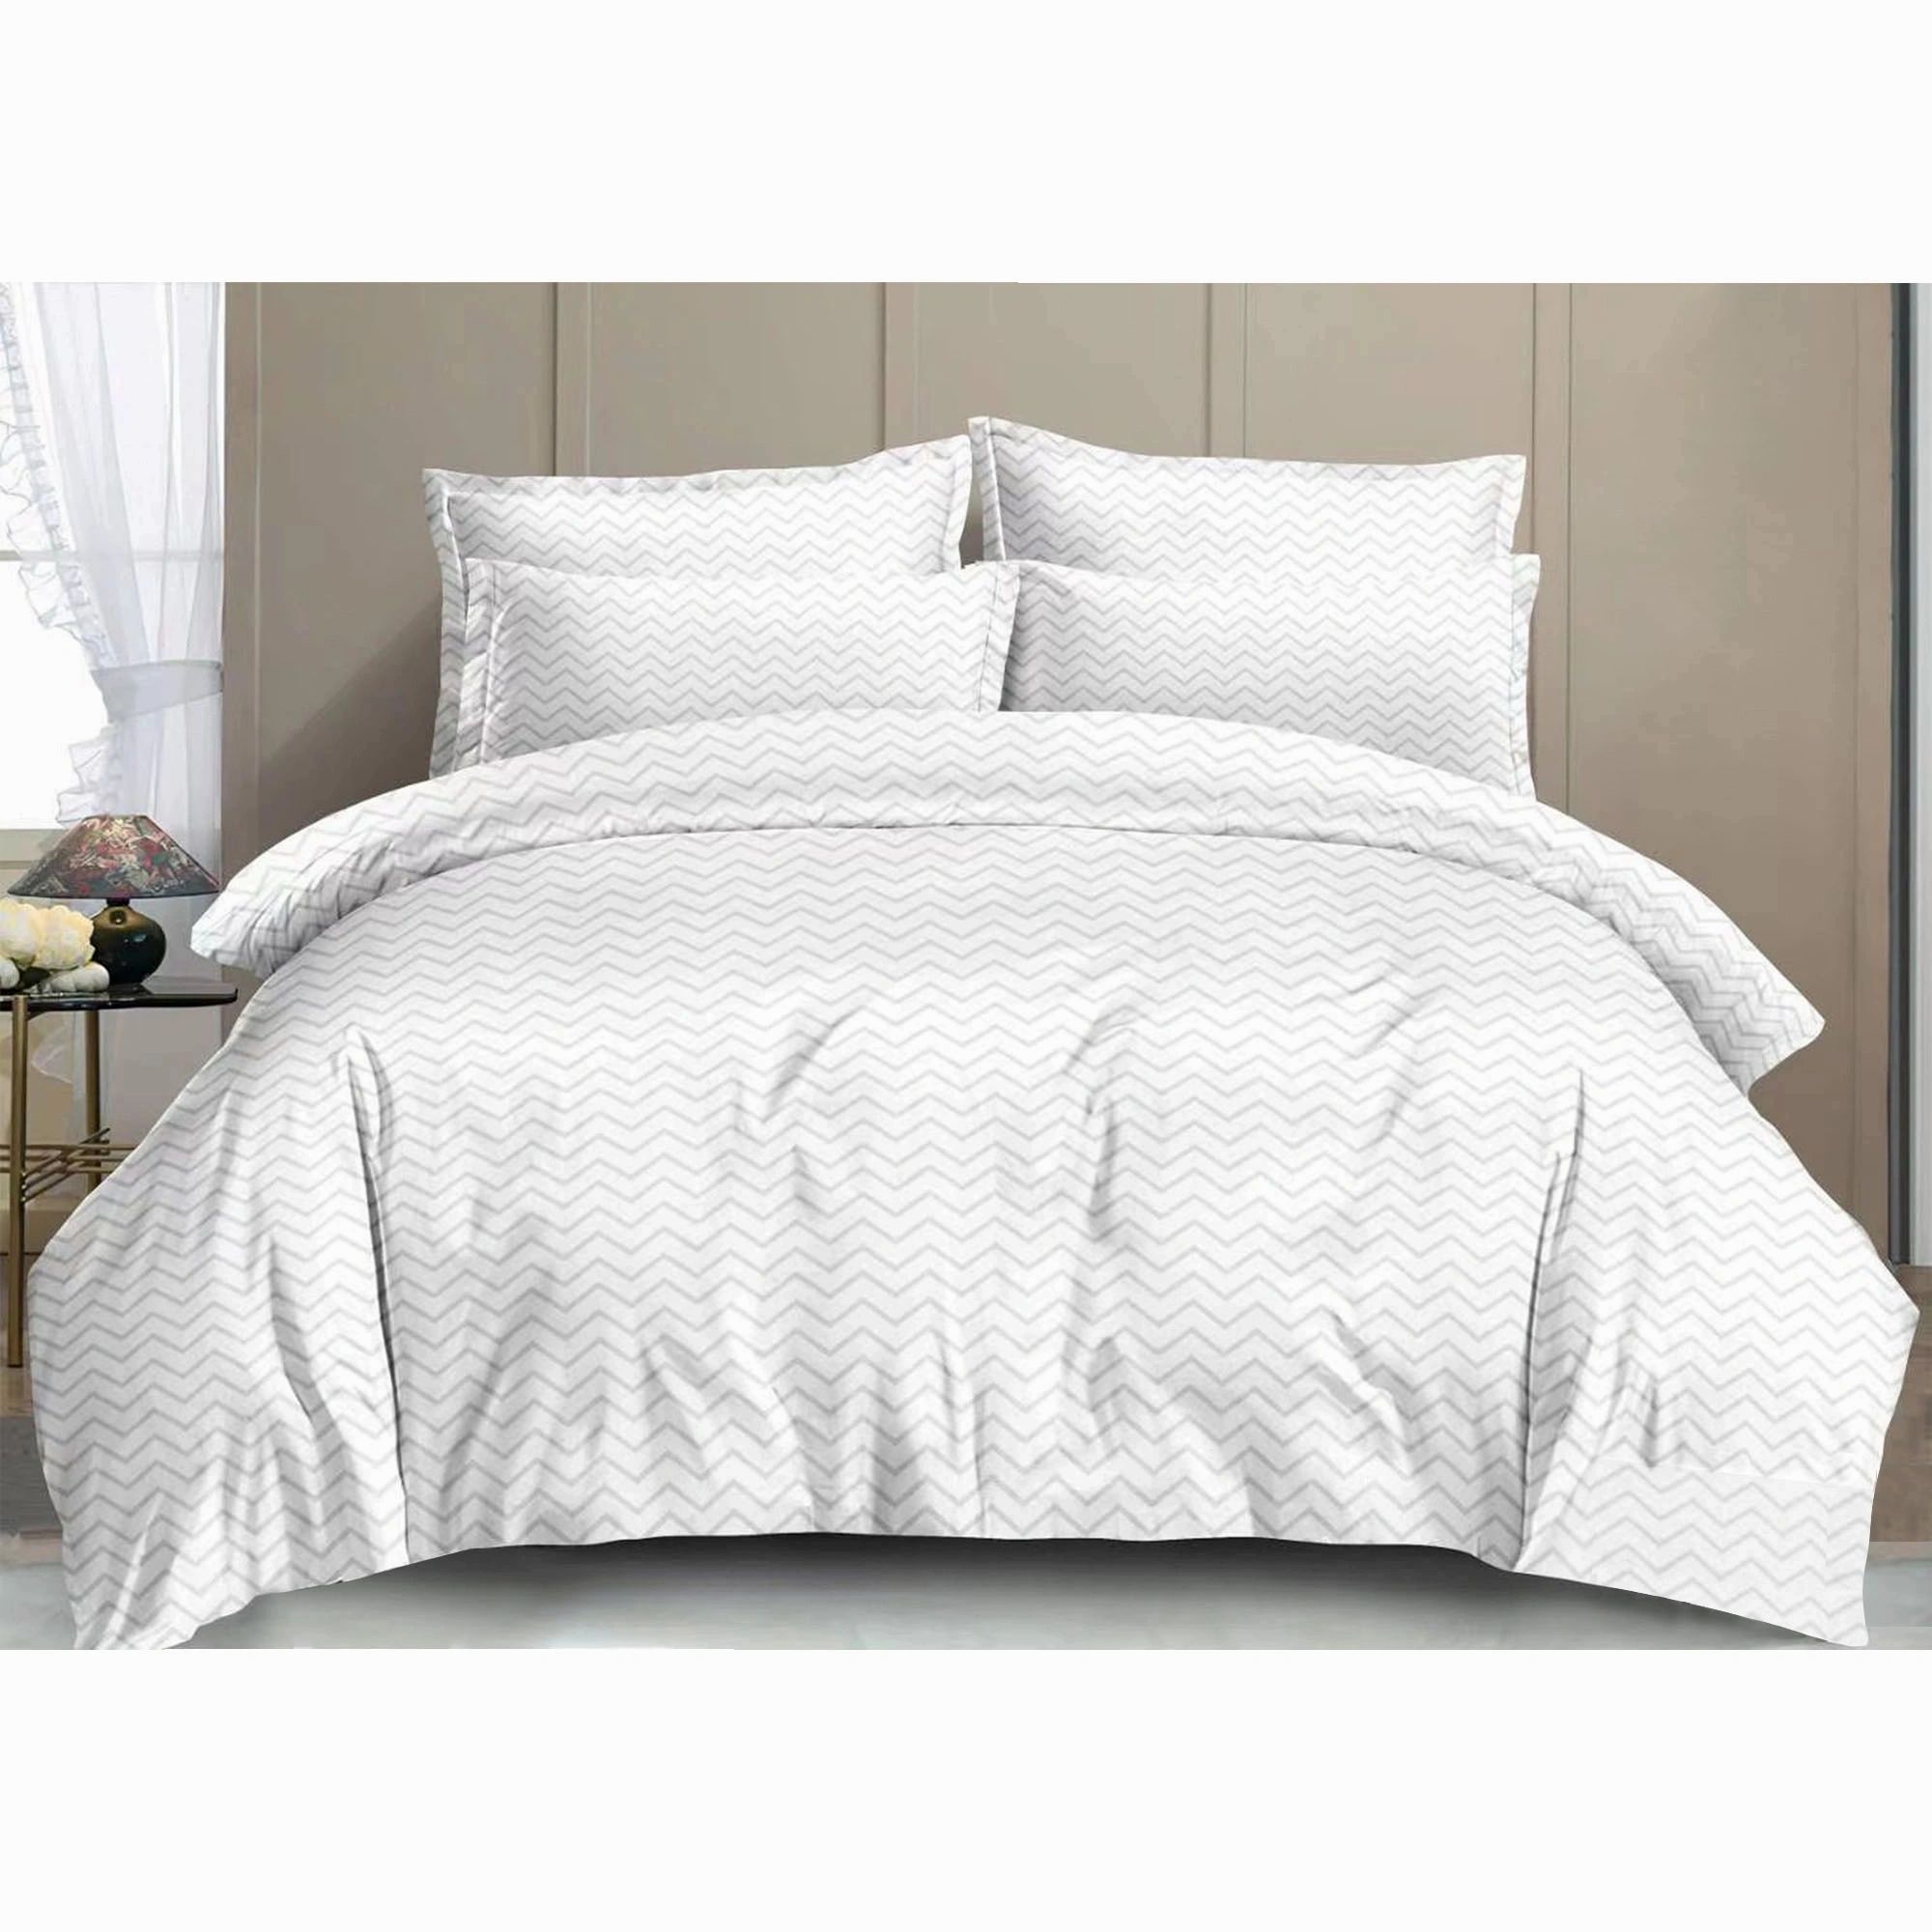 WHITE STRIPE FITTED SHEET HOTEL QUALITY BED SHEETS SINGLE DOUBLE SUPER KING SIZE